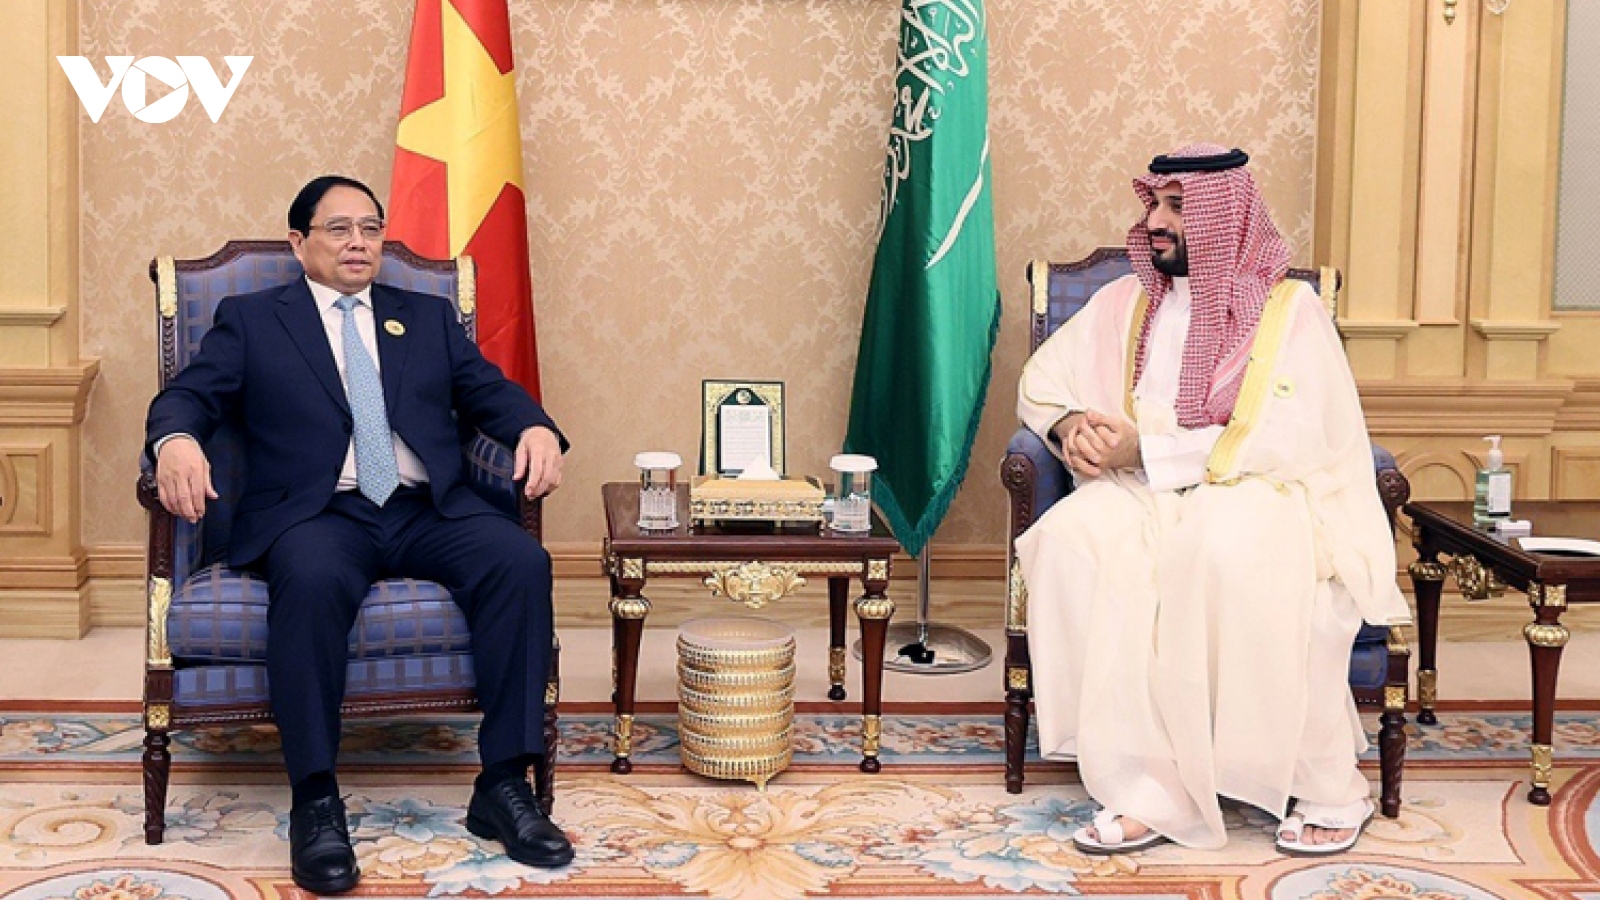 PM’s working trip to Saudi Arabia opens up new cooperation opportunities